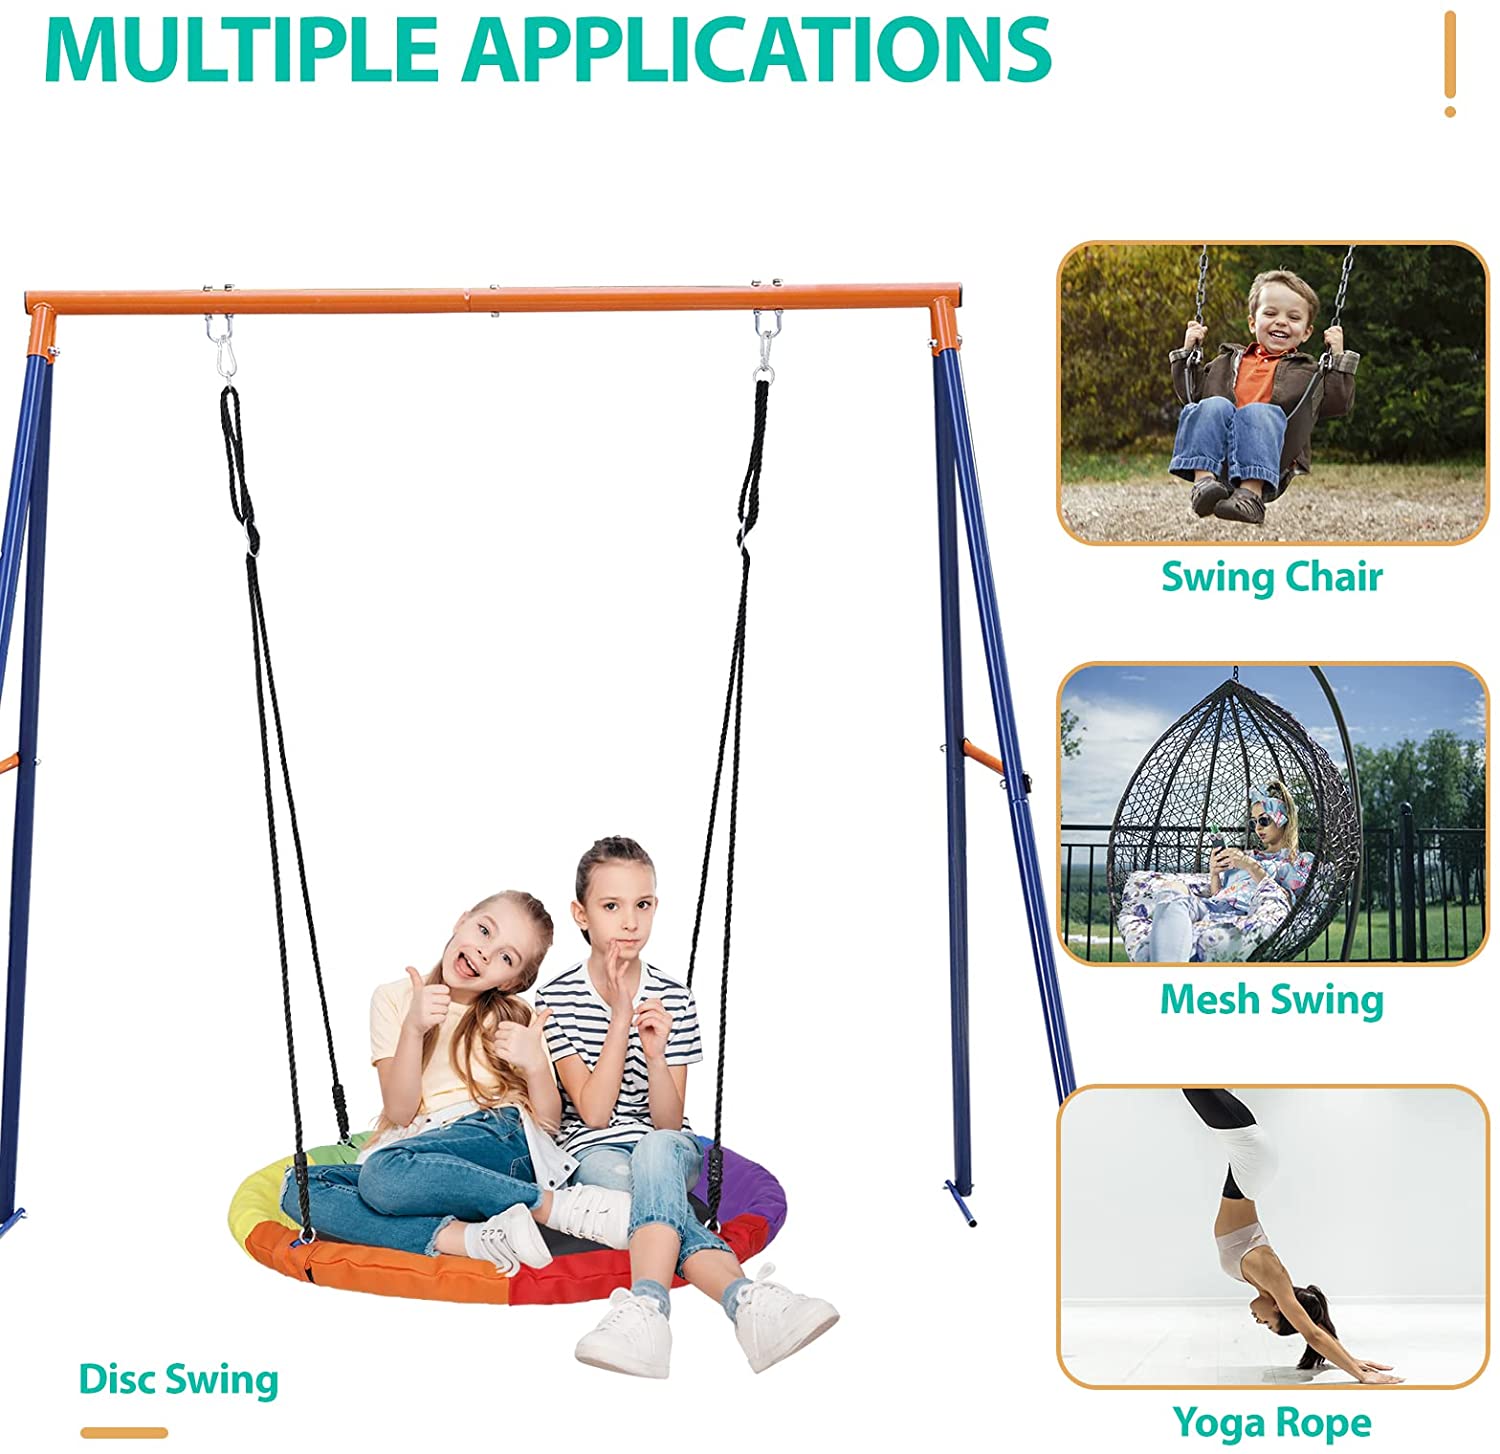 Heavy Duty Metal Stand Fits for Most Swings: Use this upgrade swing set to hang all types of swings, net swing, web swing, saucer swing, patio swings, porch swings, hanging chairs, baby carrier swings and more.